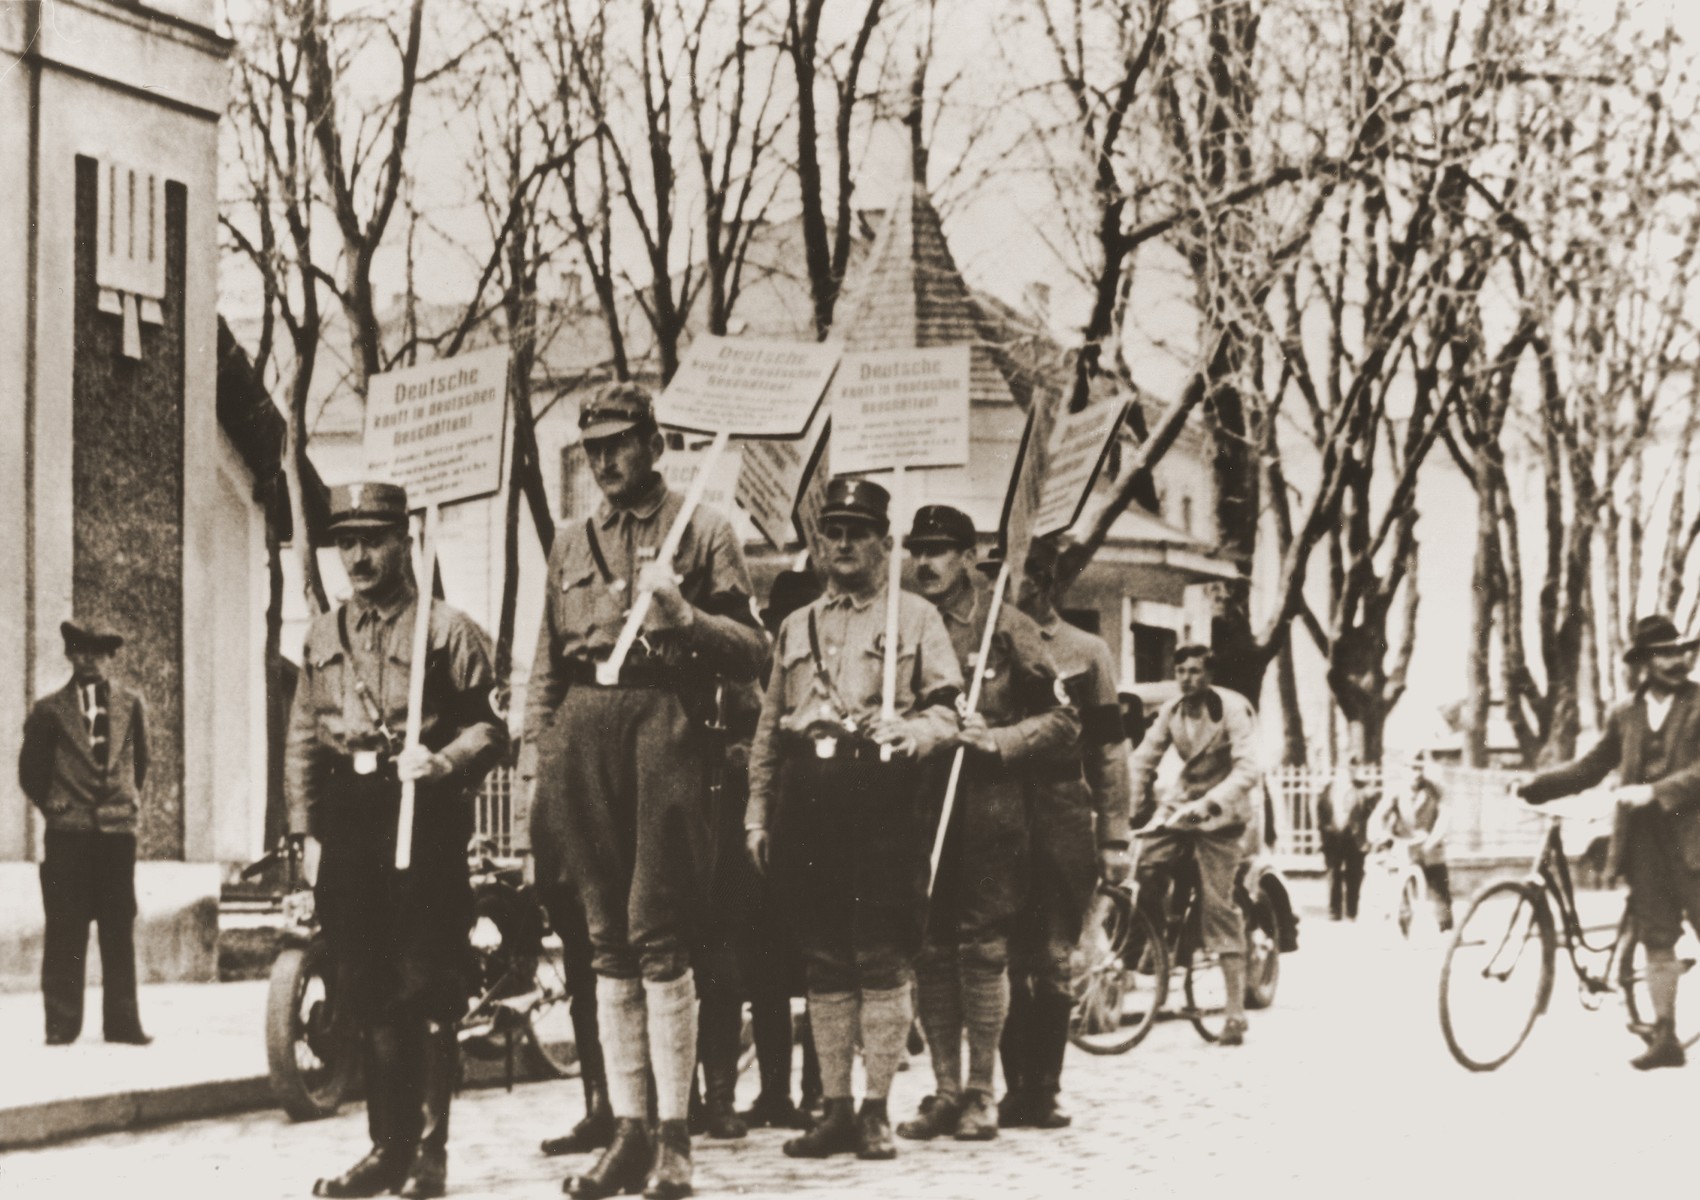 Members of the SA take to the streets of Rosenheim to enforce boycott of seven Jewish-owned businesses on the morning of April 1, 1933.  

Their signs read:  "Germans shop in German stores!  The Jew is stirring up hate against Germany!  Therefore, do not go to Jewish stores!"